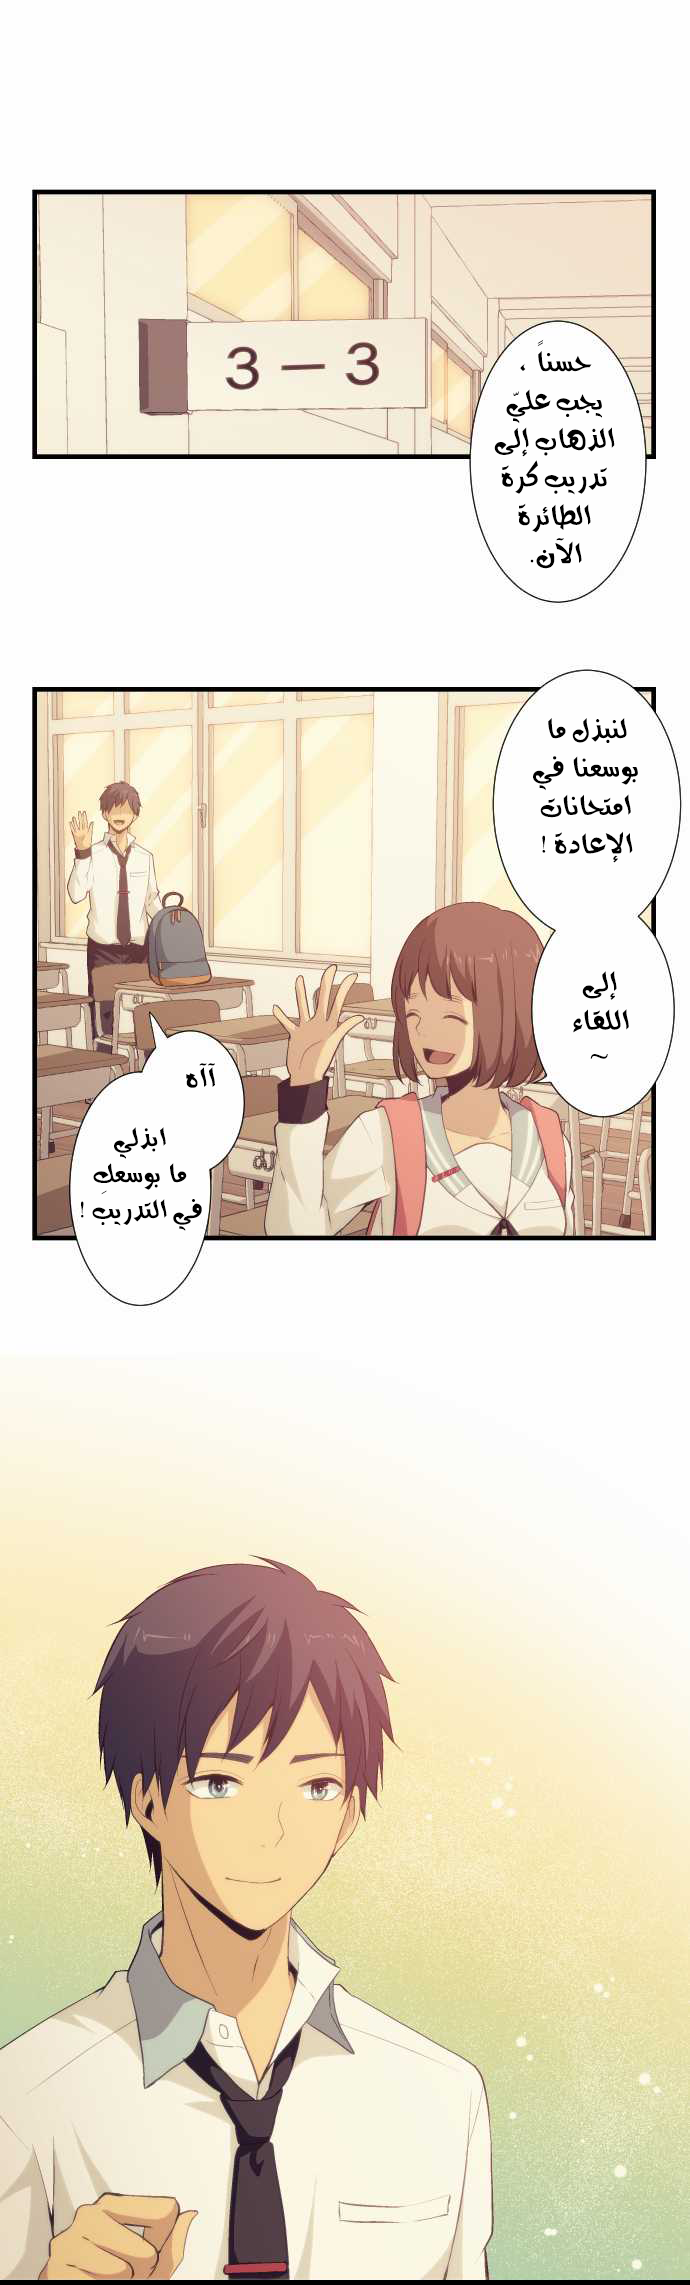 ReLIFE: Chapter 59 - Page 1